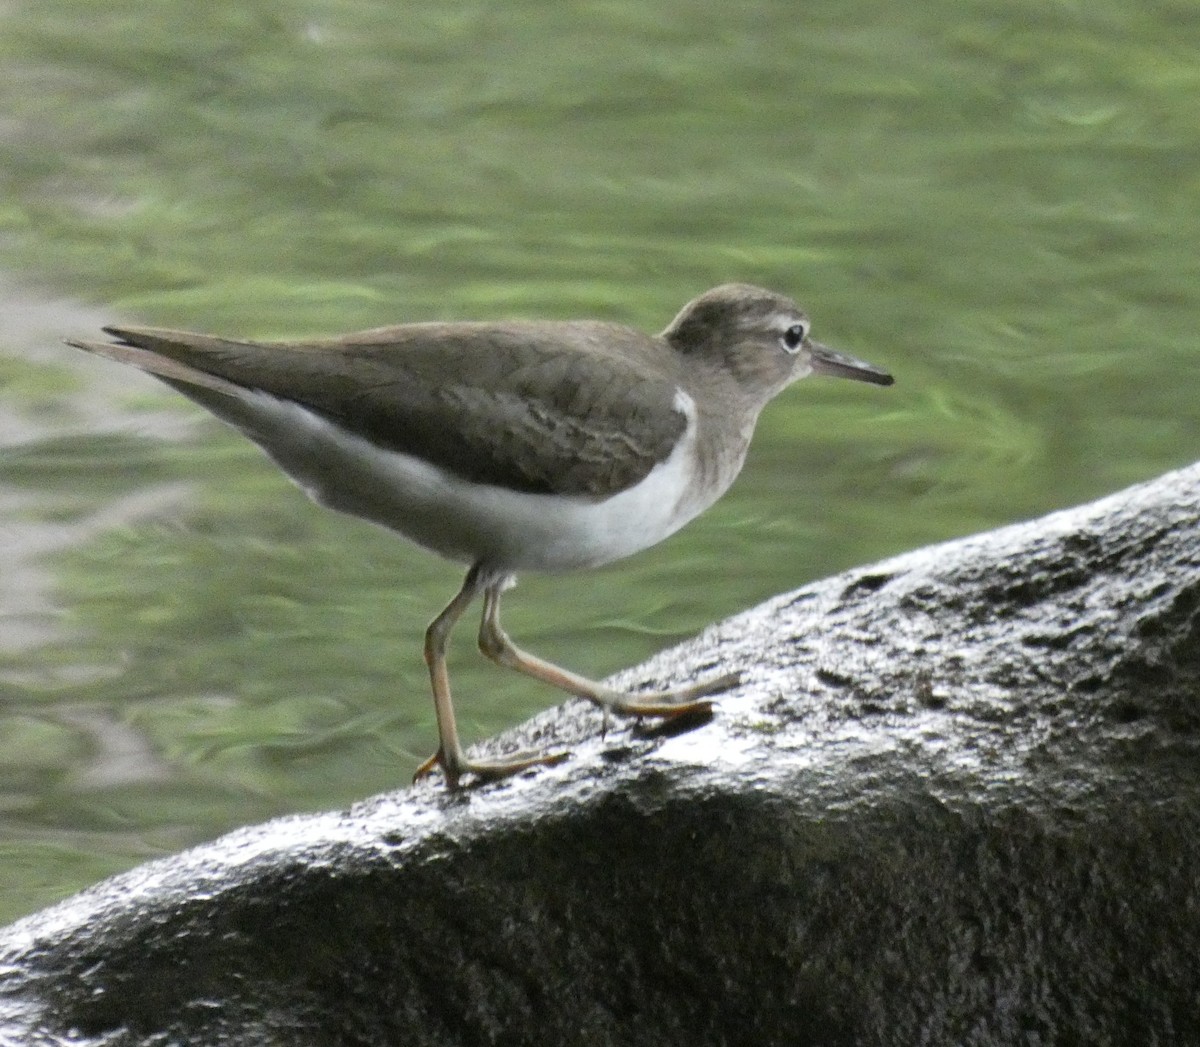 Spotted Sandpiper - River Ahlquist